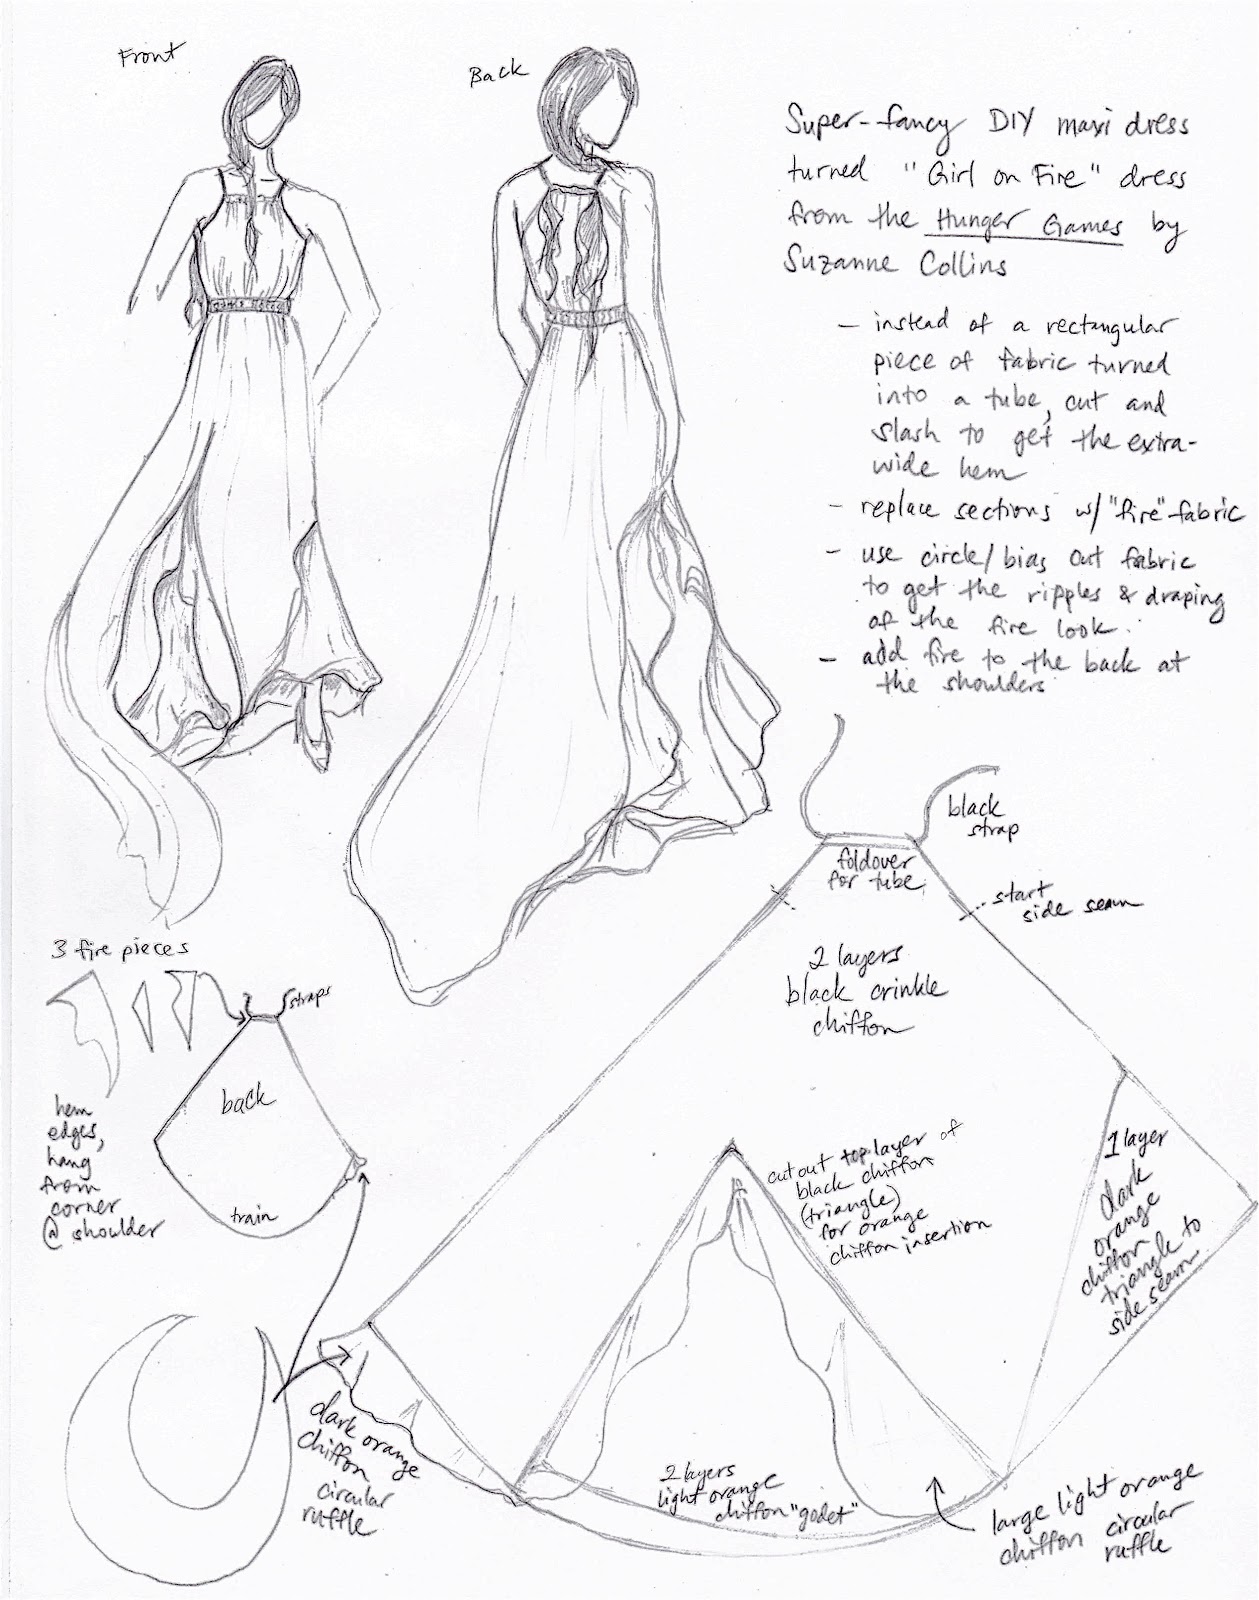 My sketches and breakdown of parts for the girl on fire dress